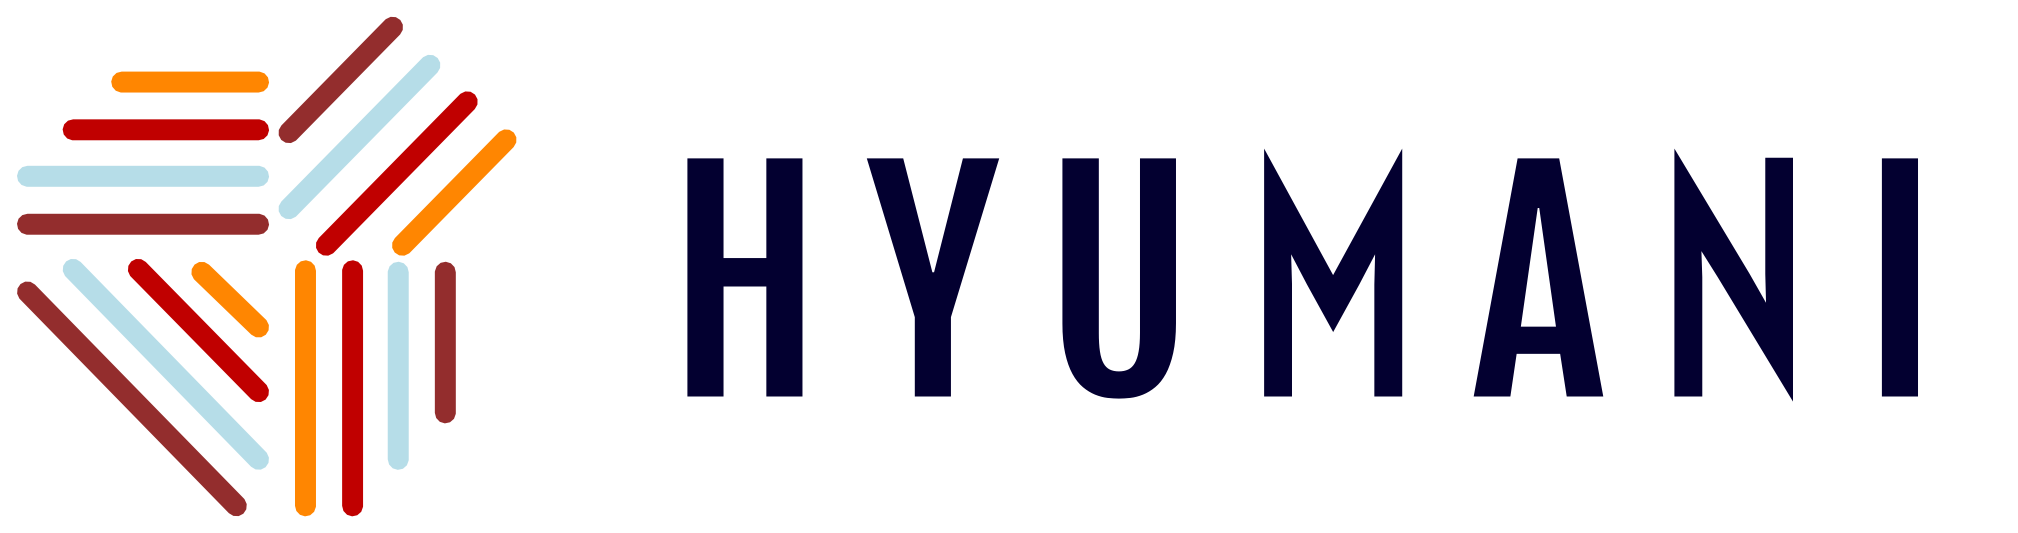 hyumani.com - solution for management styles based on personal values and self motivation